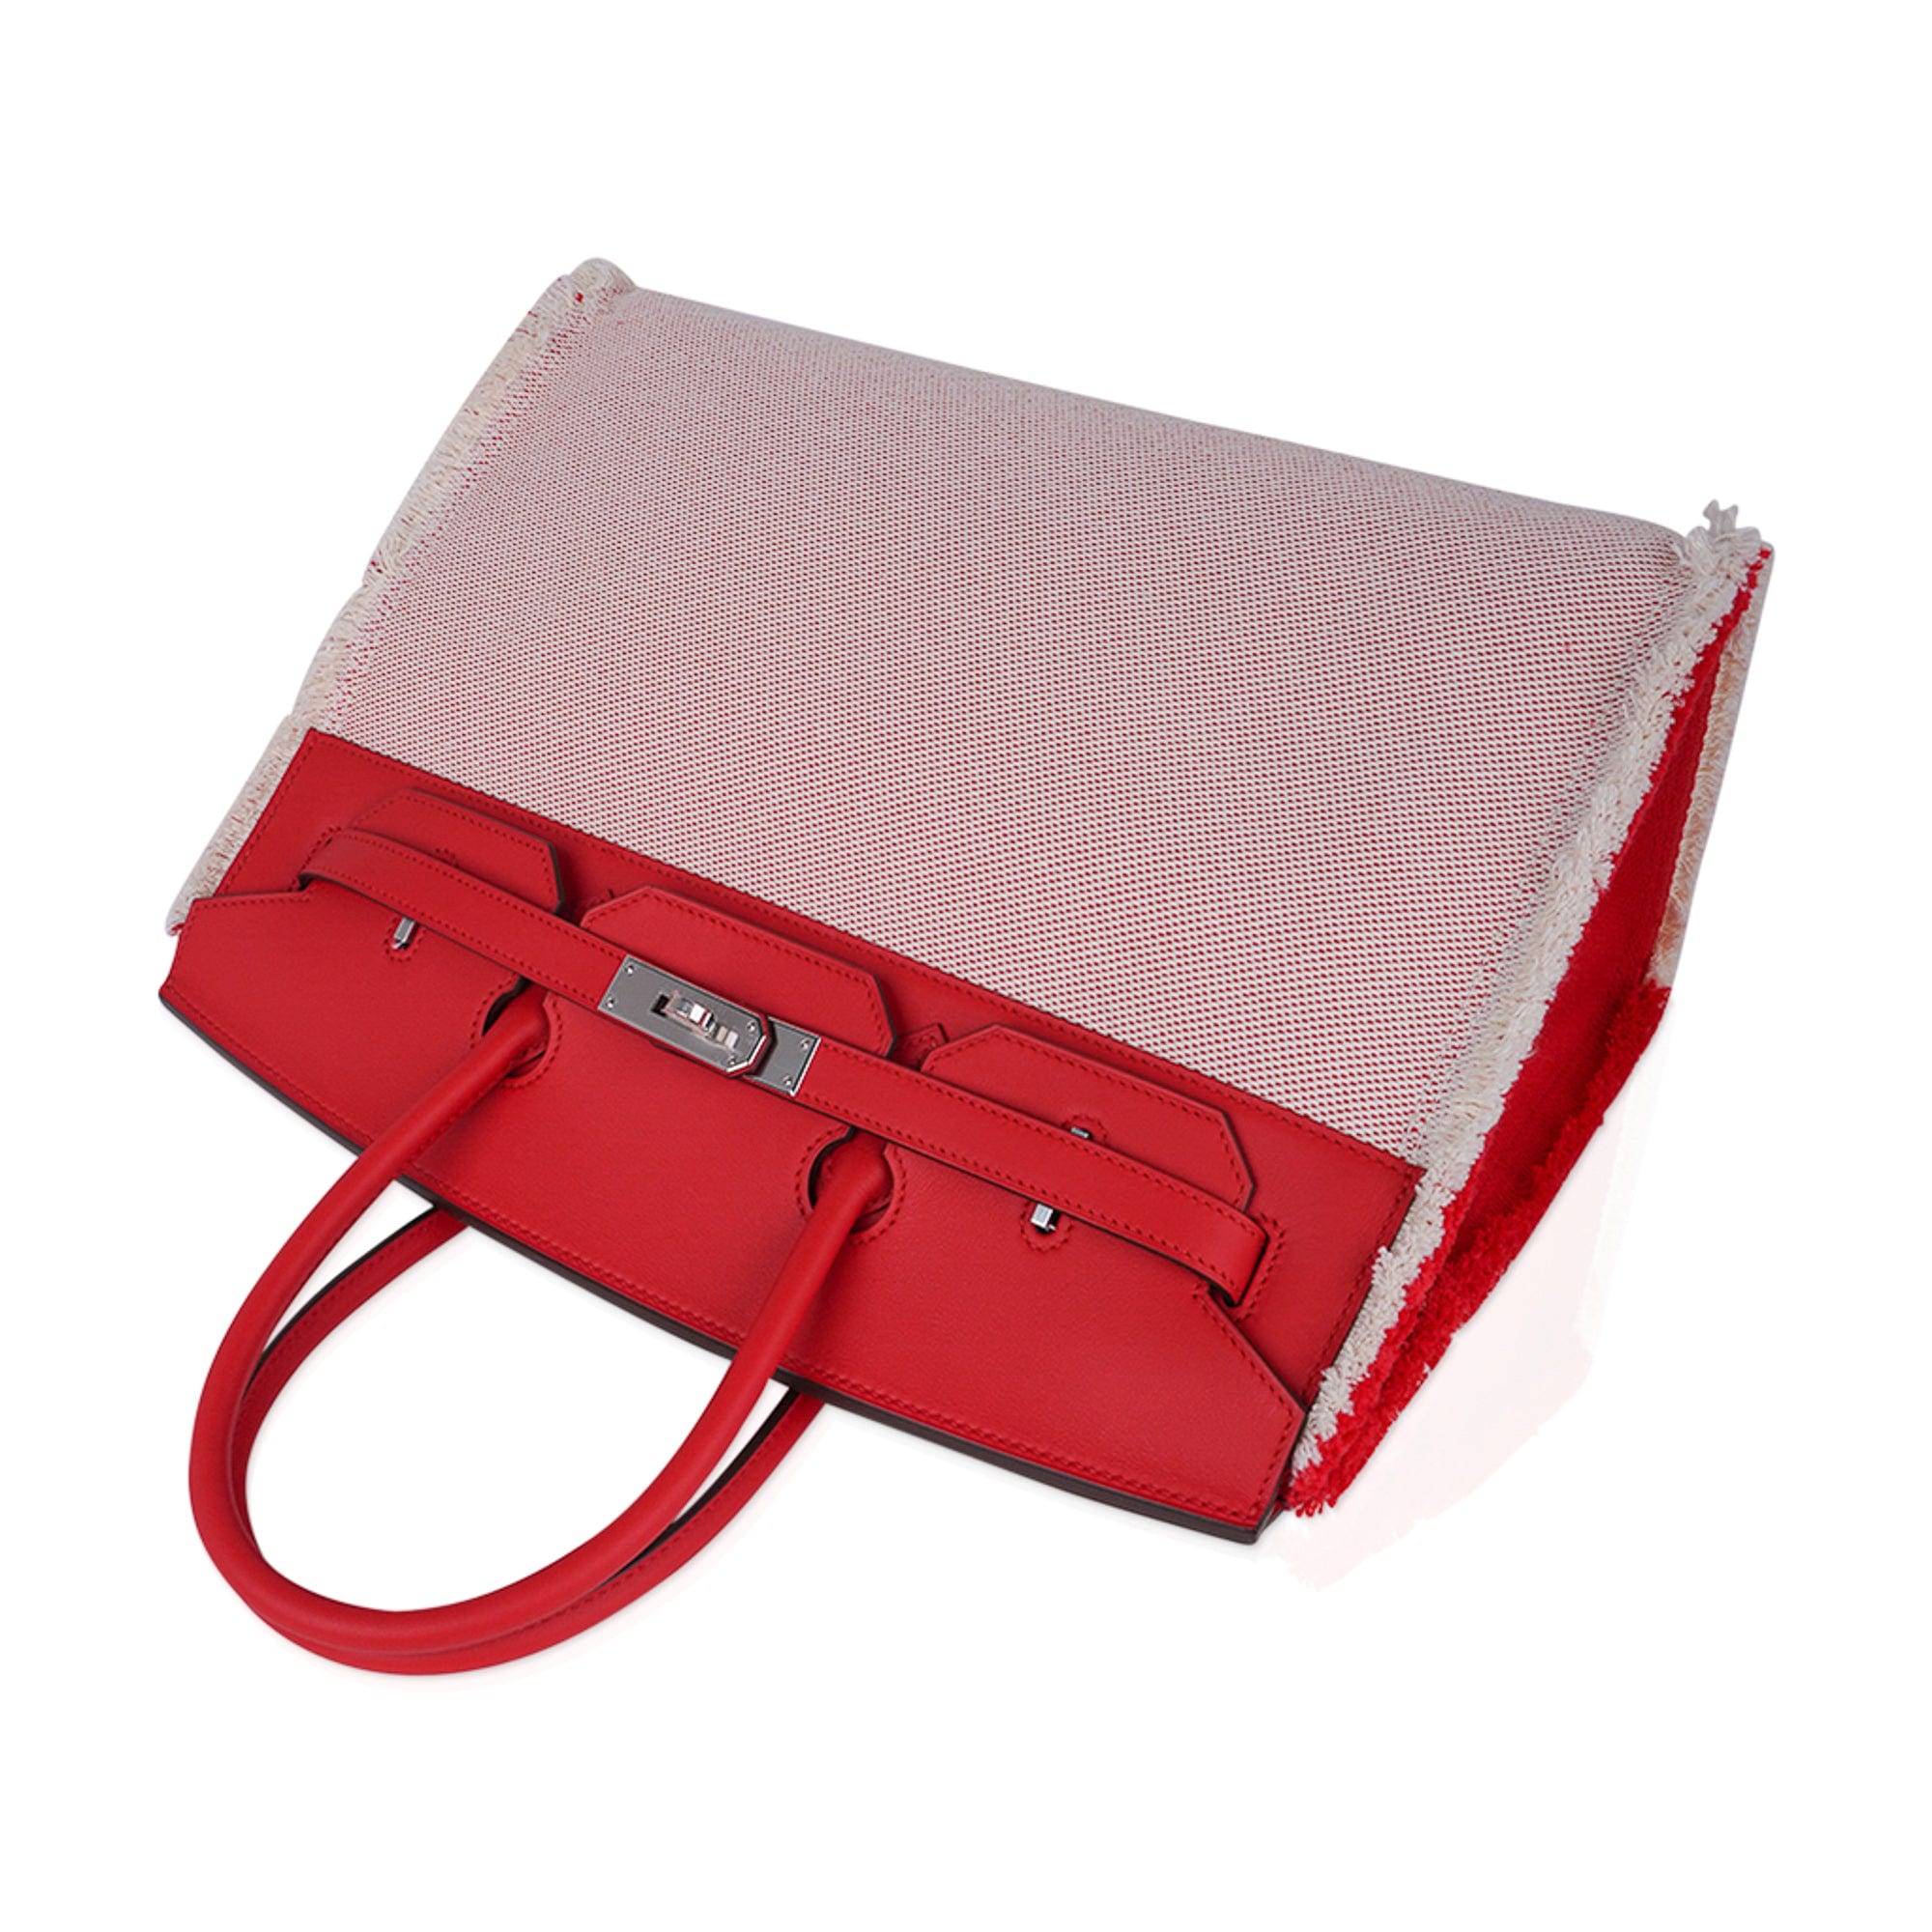 A LIMITED EDITION ROUGE DE COEUR SWIFT LEATHER & ÉCRU TOILE H FRAY FRAY  BIRKIN 35 WITH PALLADIUM HARDWARE, HERMÈS, 2021